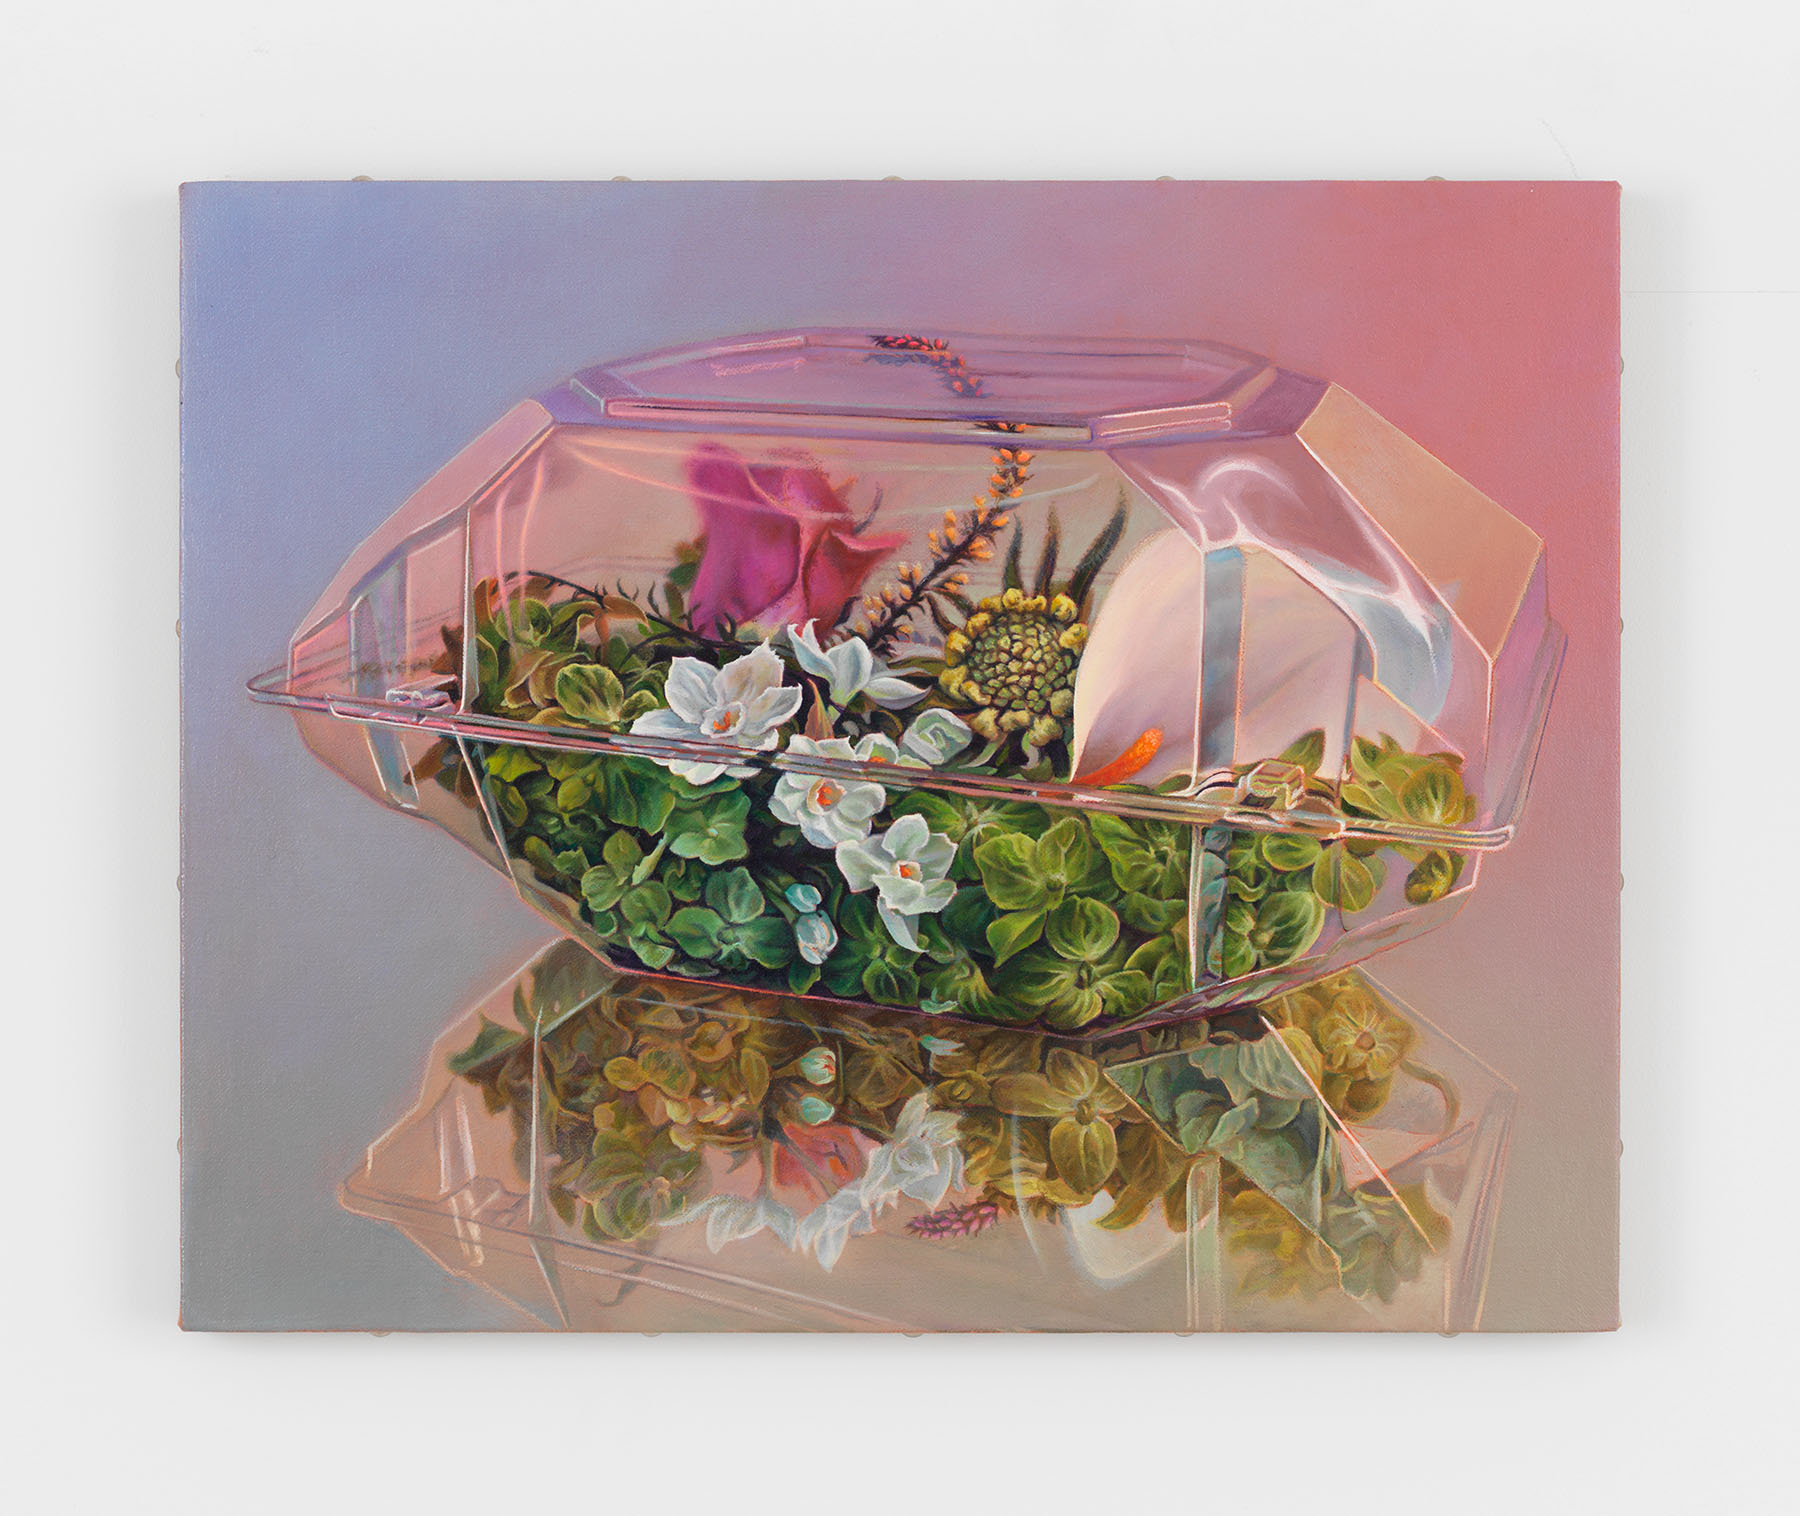 Chason Matthams, Corsage (lavender, pink, green), 2021, Oil on linen over panel, 16 x 20 in.